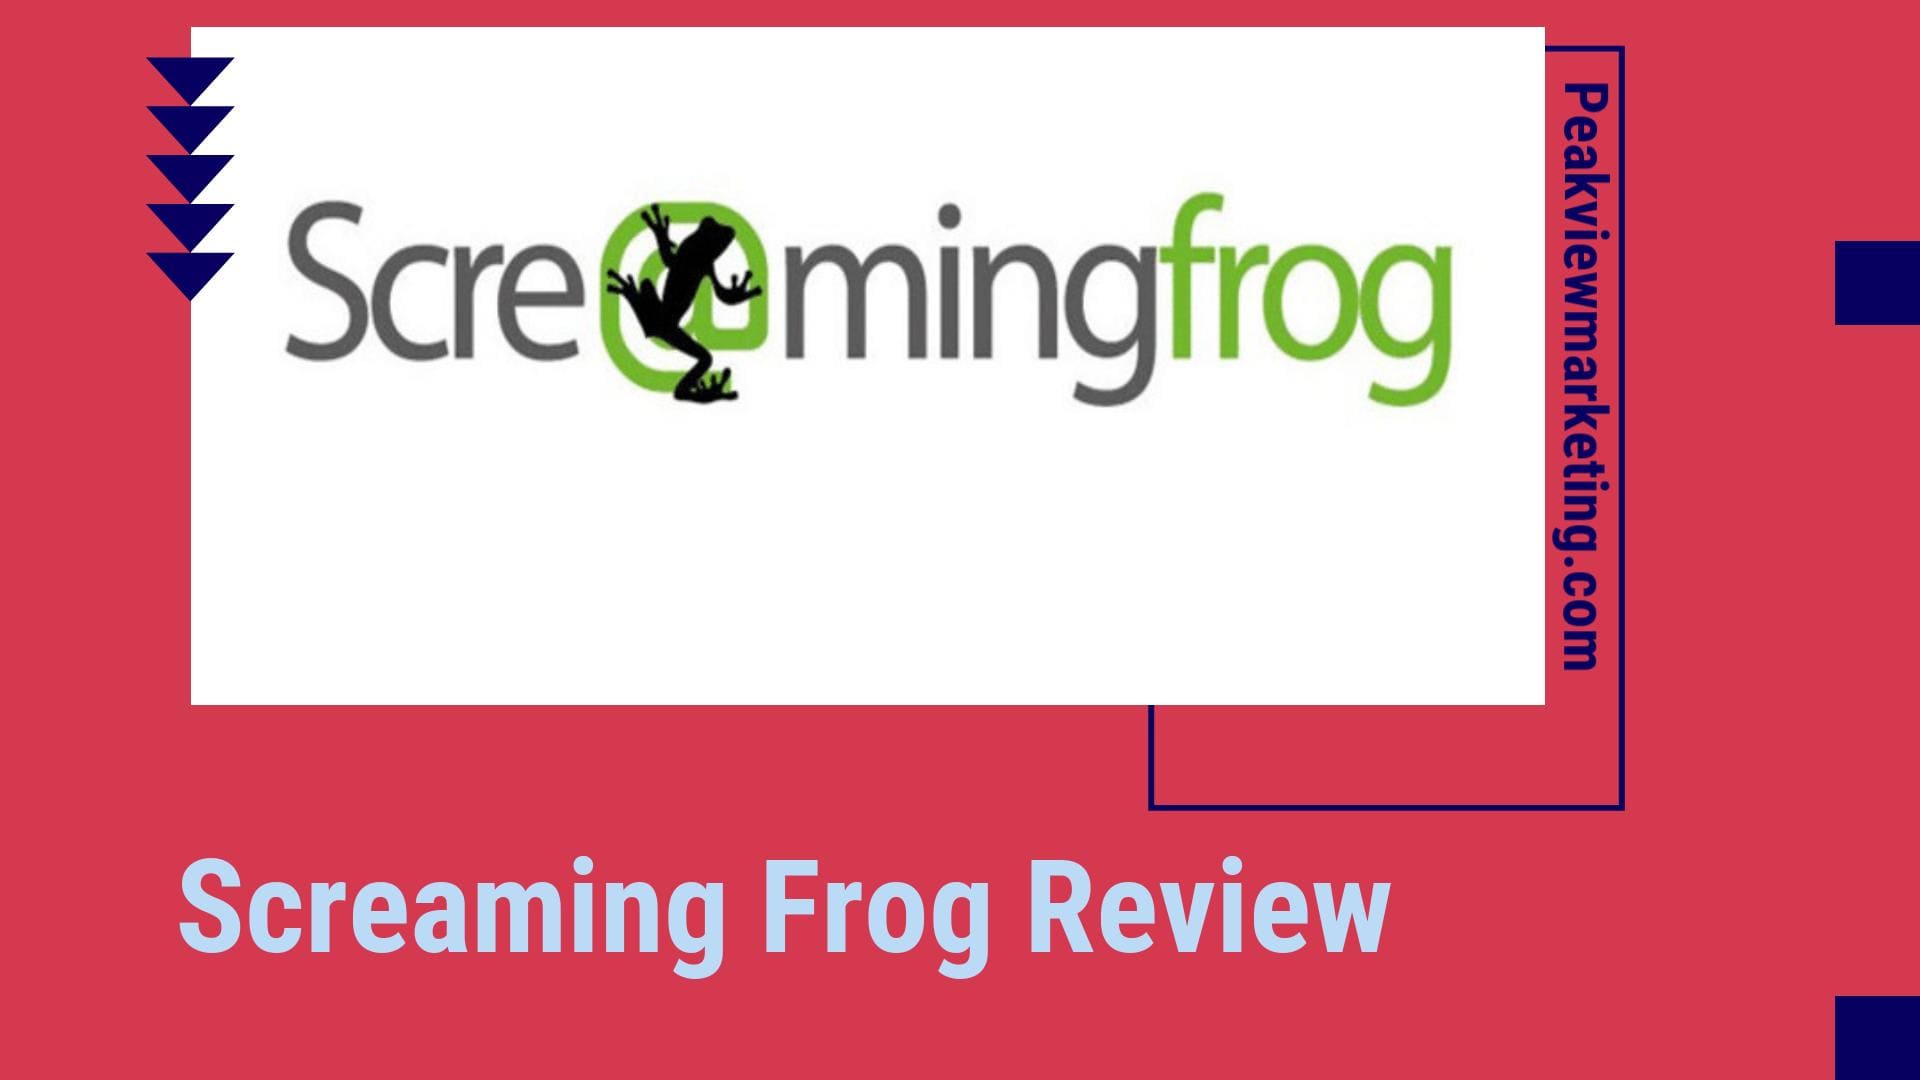 Screaming Frog Review Image